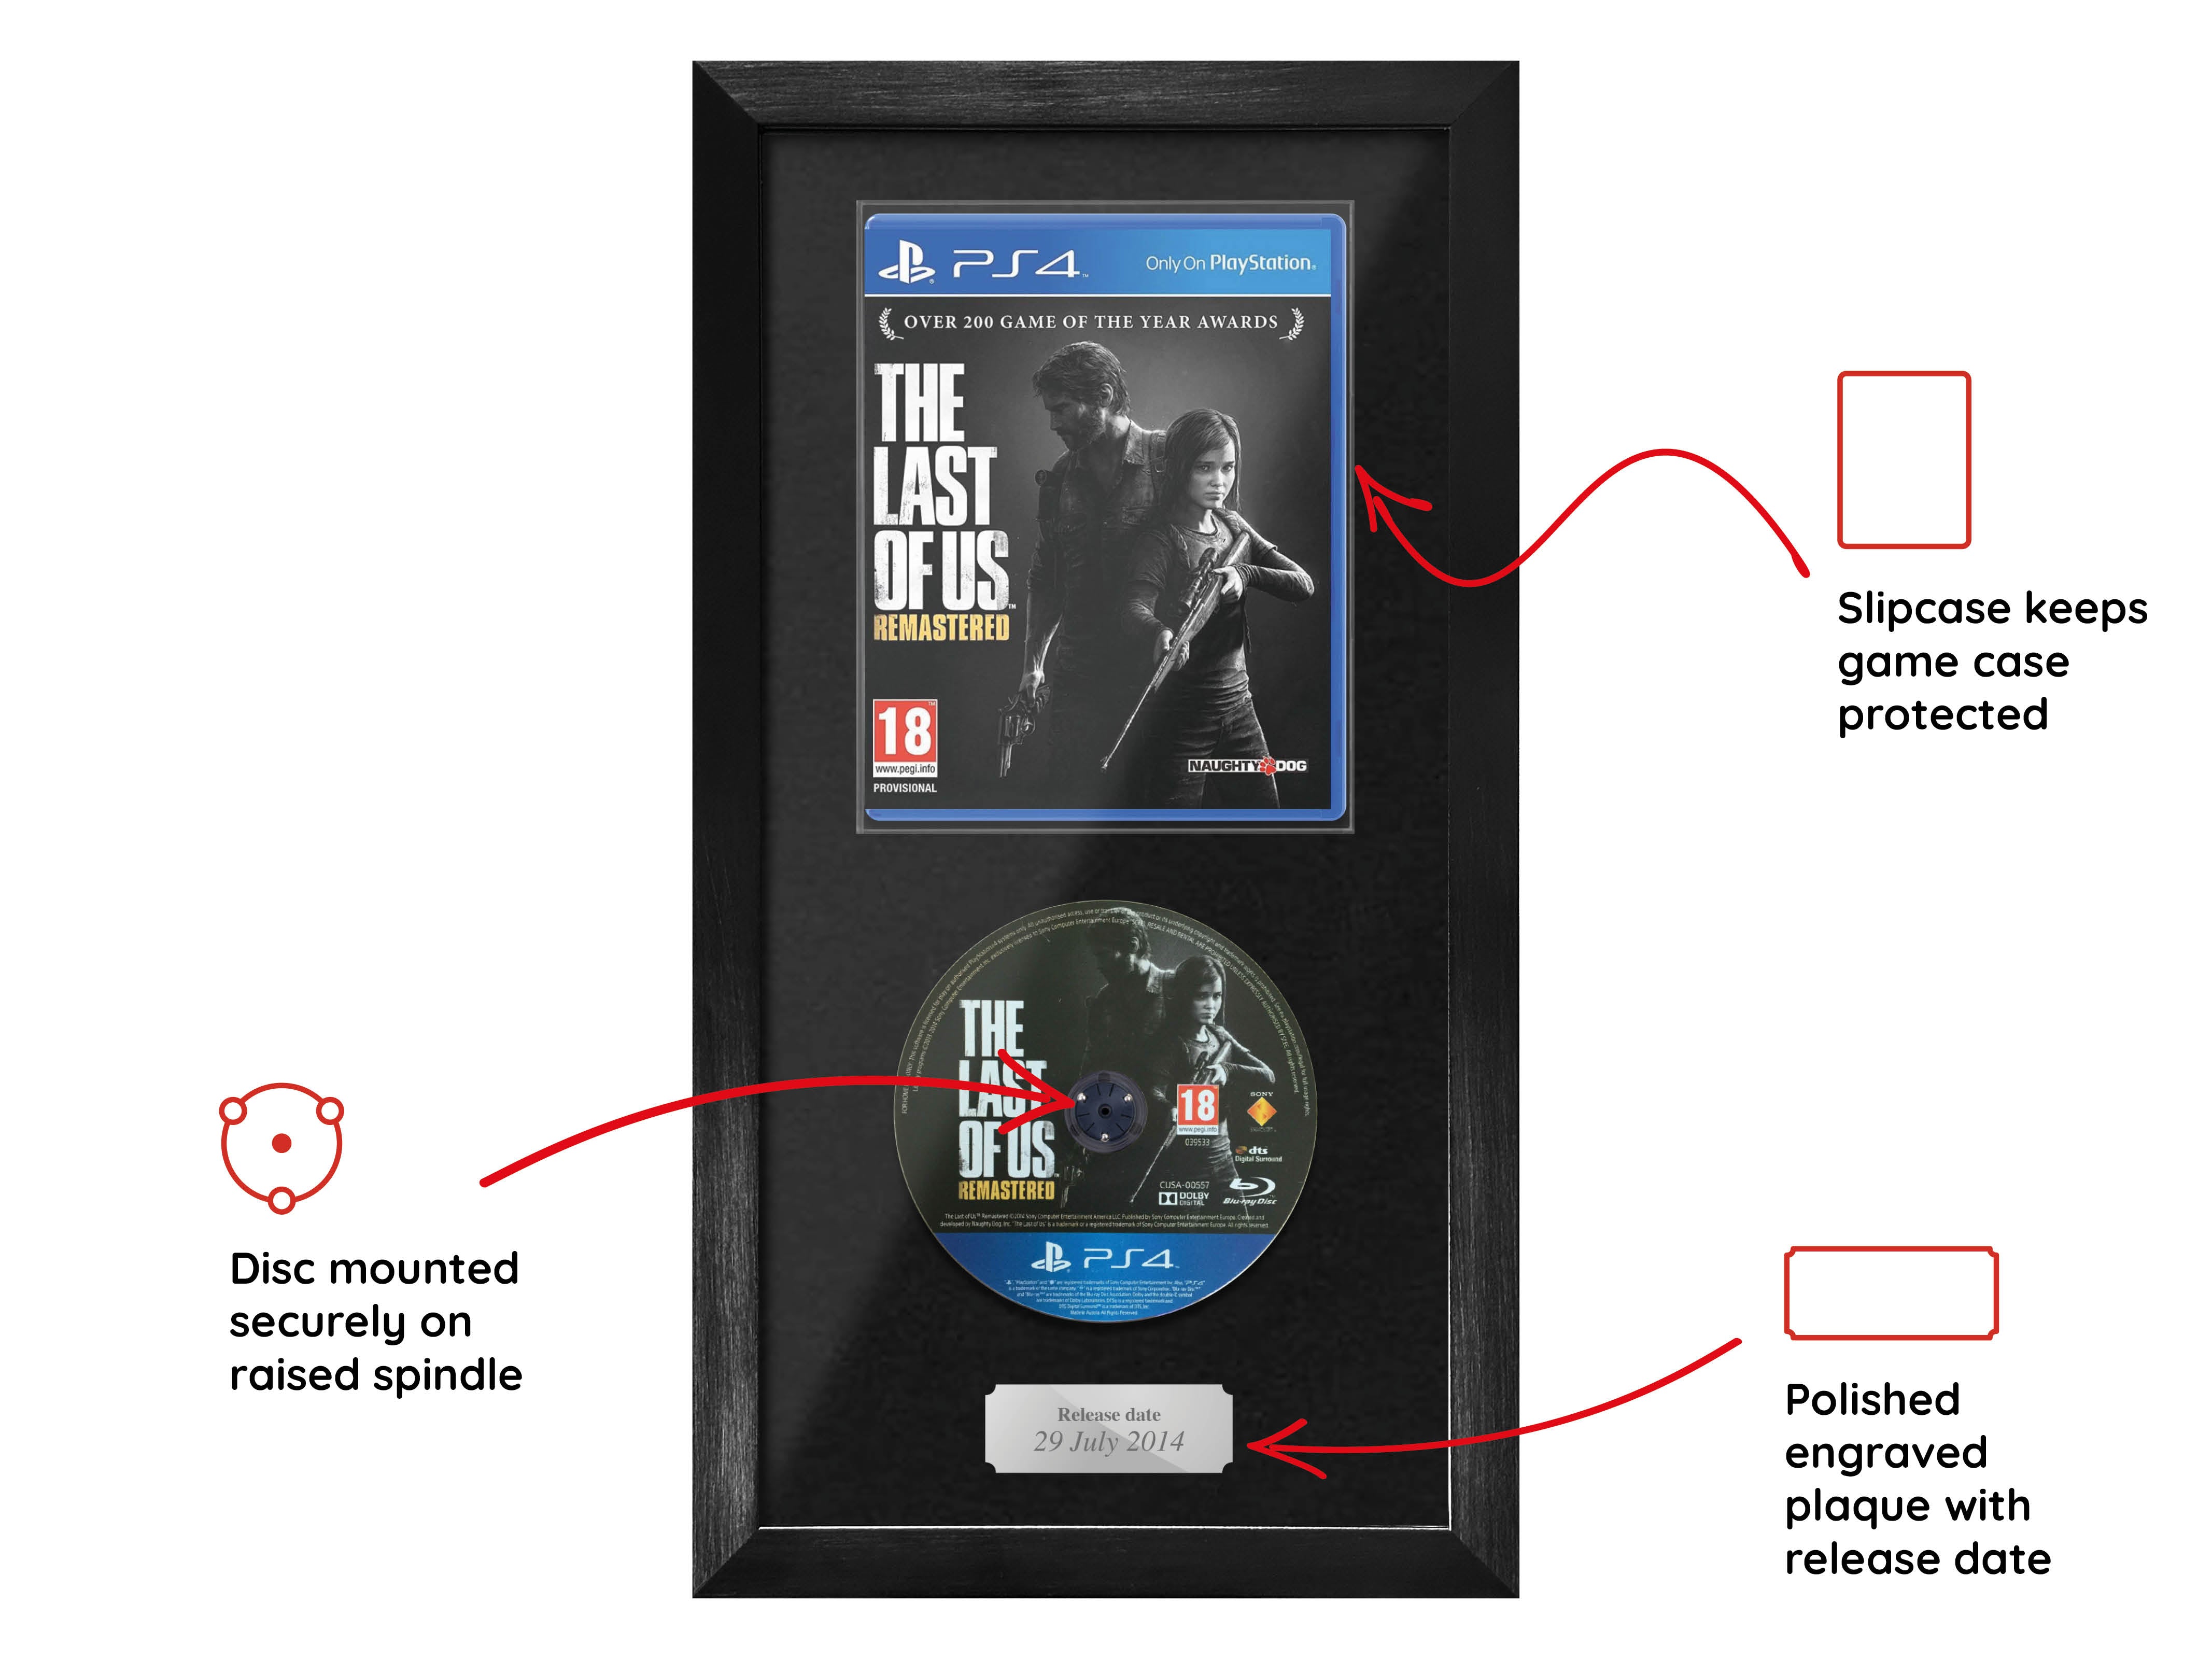 The Last of Us: Remastered (PS4) Expo Range Framed Game